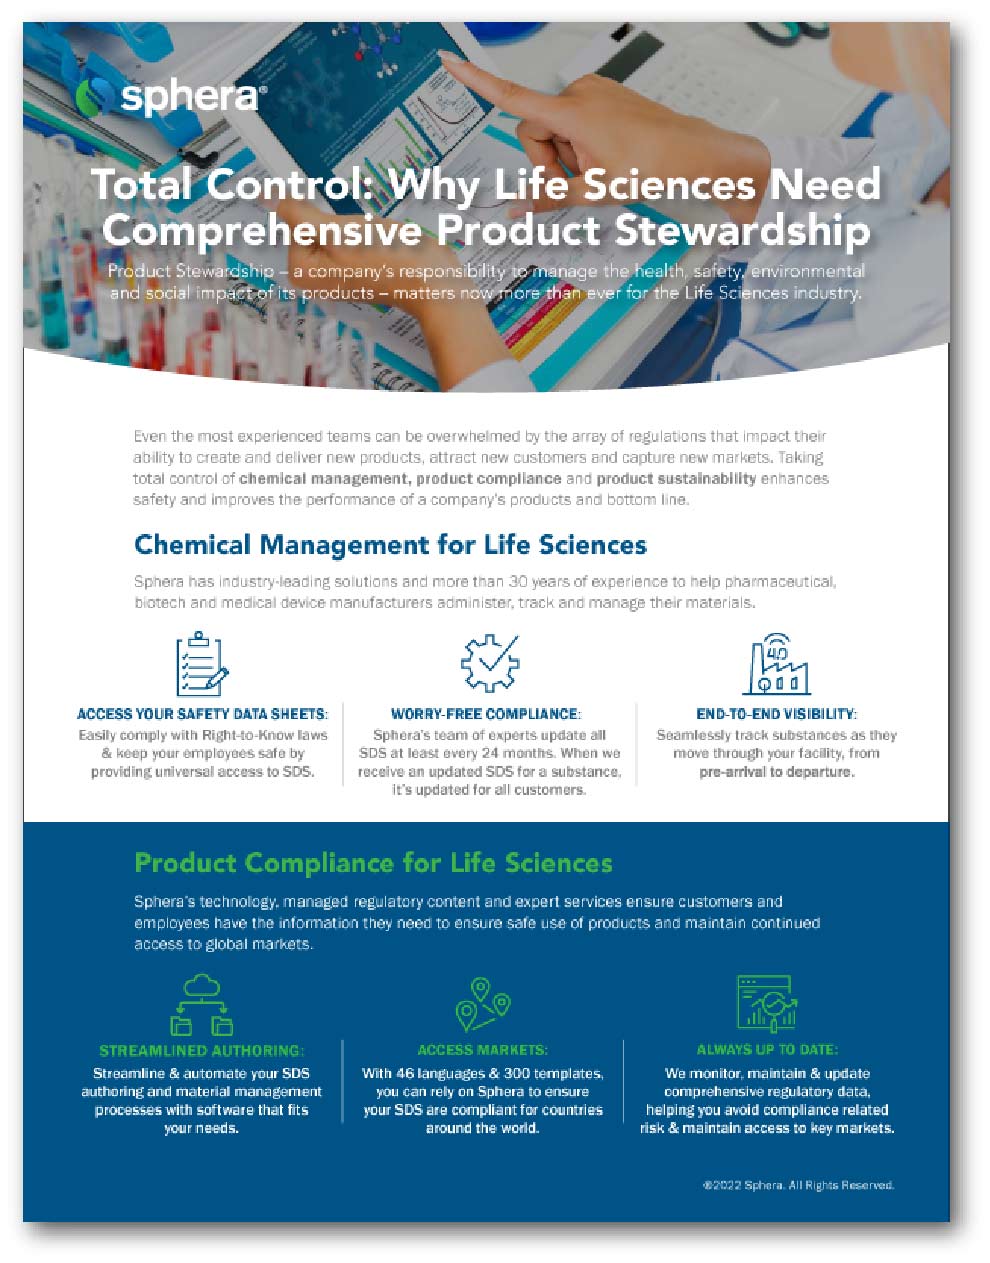 Total Control of Product Stewardship for Life Sciences